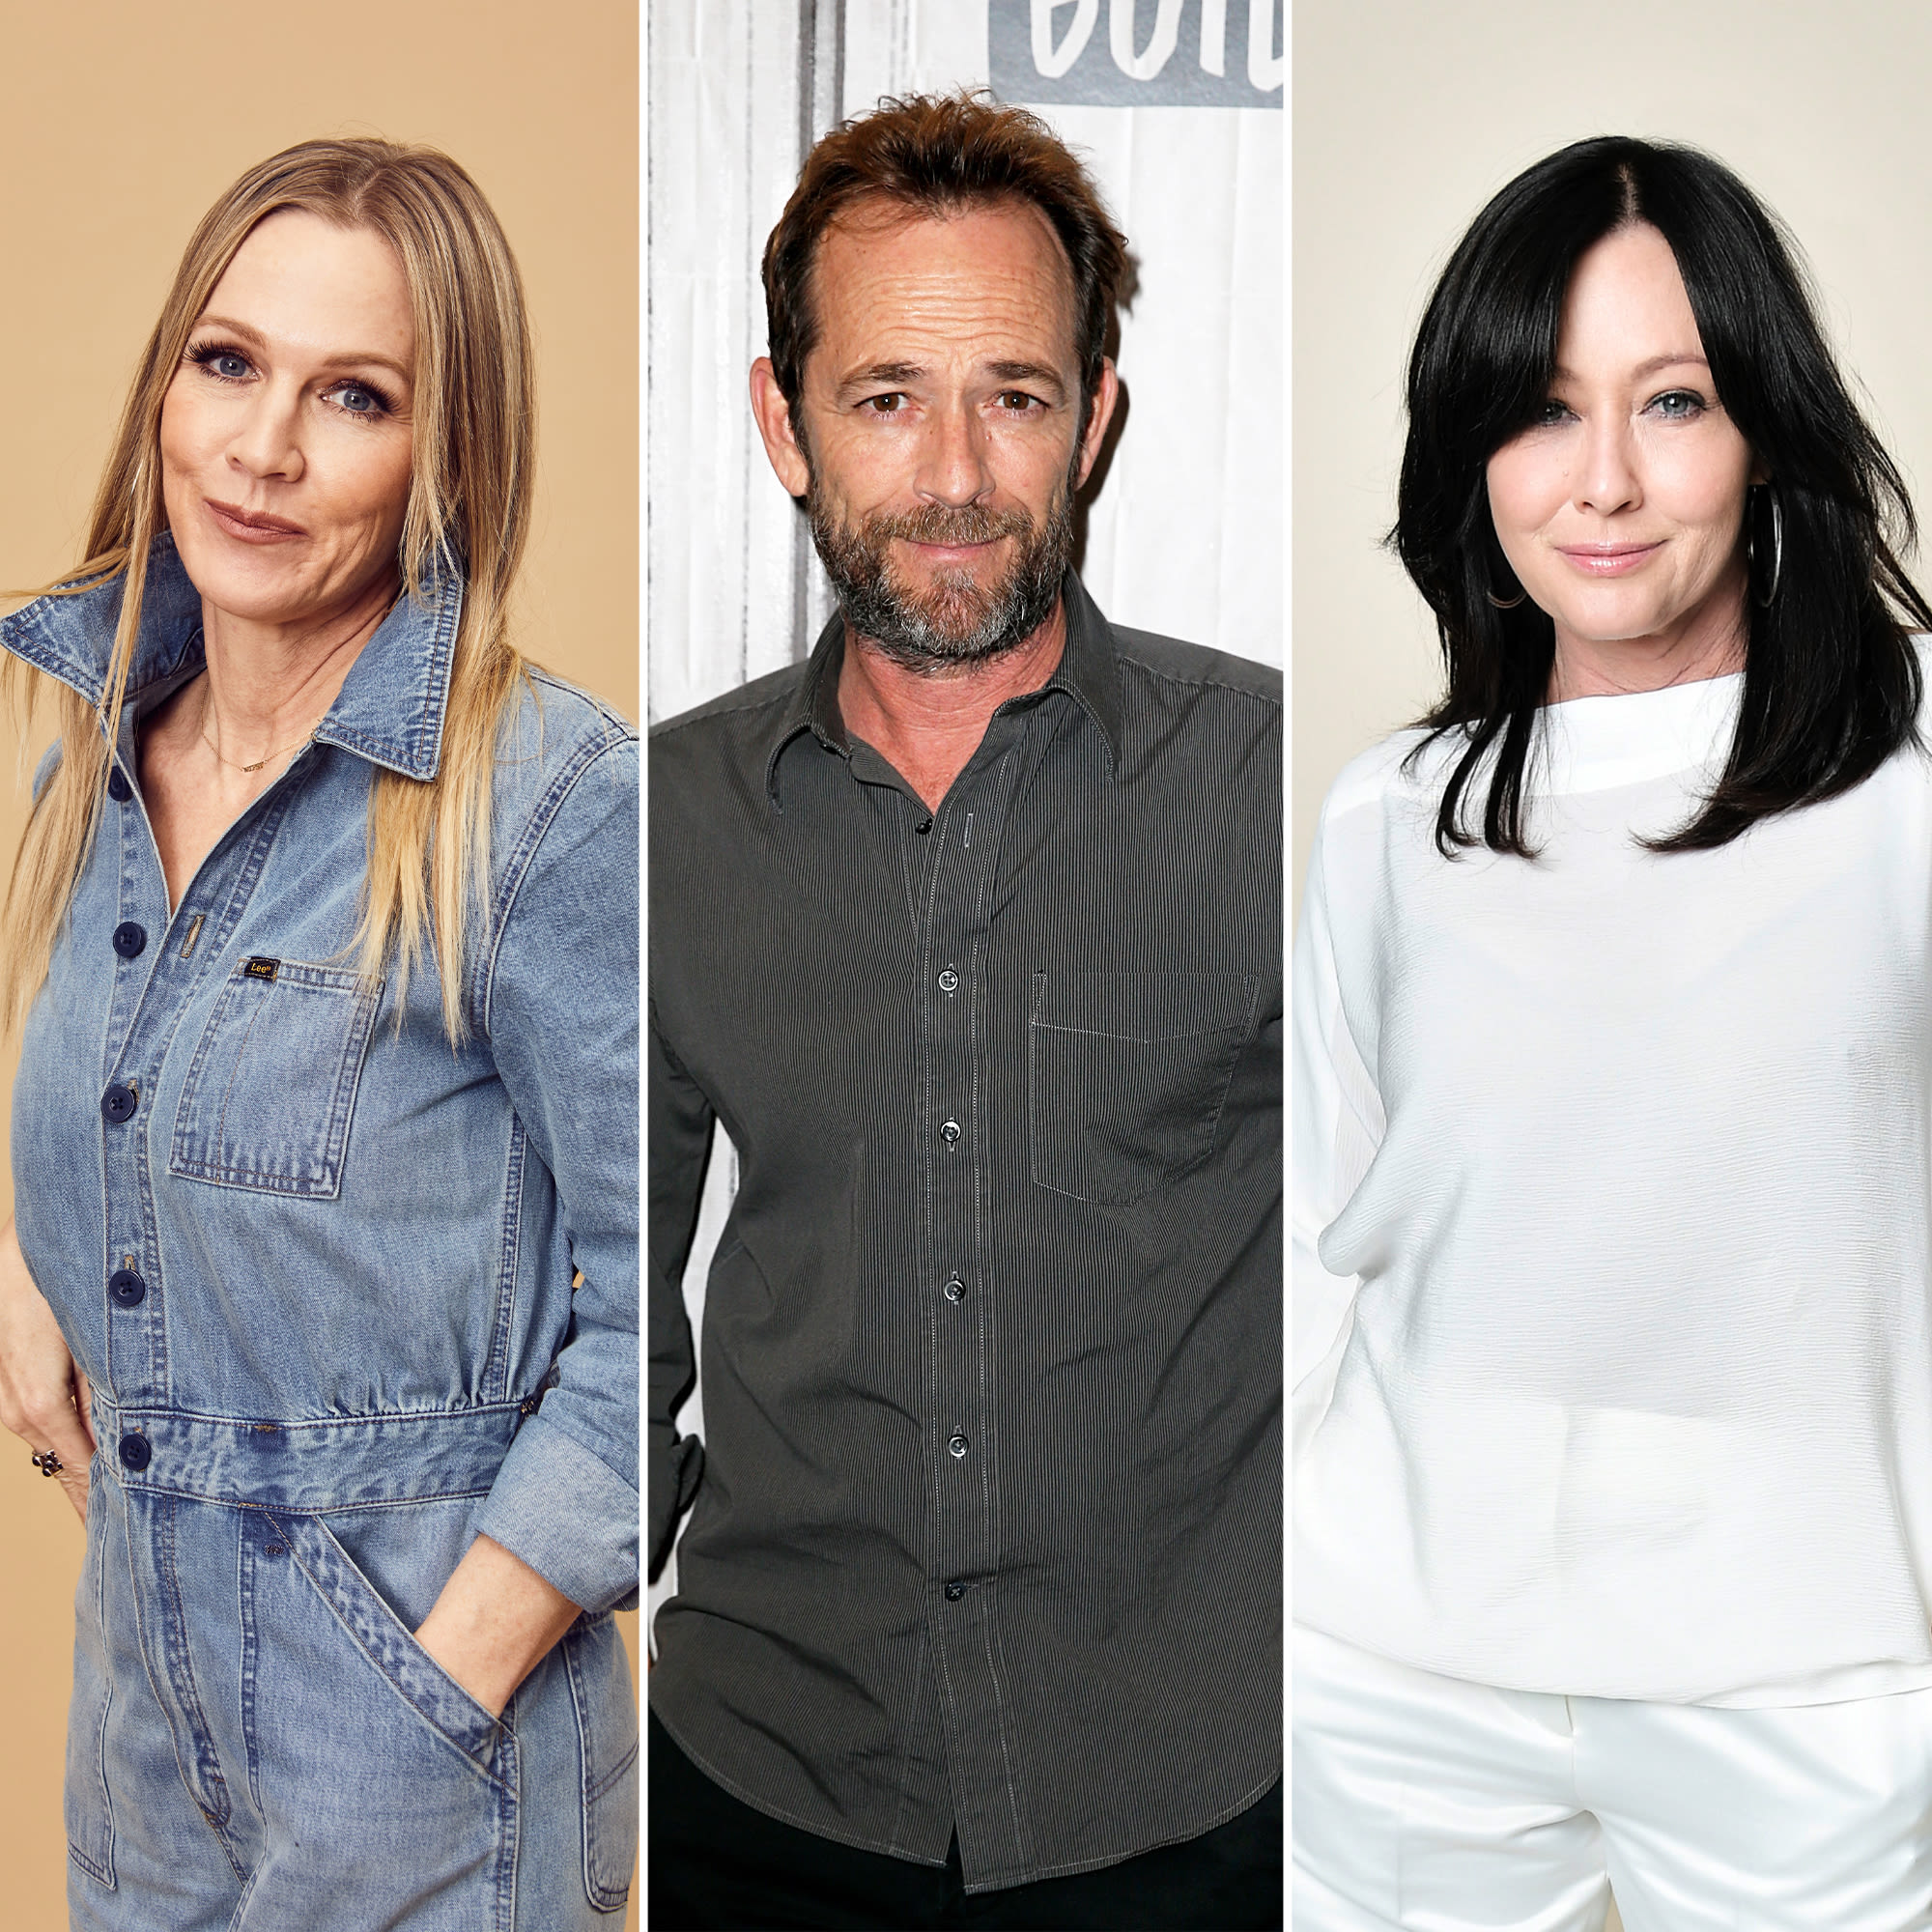 Jennie Garth Reveals She Felt ‘Very Fearful’ After 90210’s Luke Perry and Shannen Doherty’s Deaths